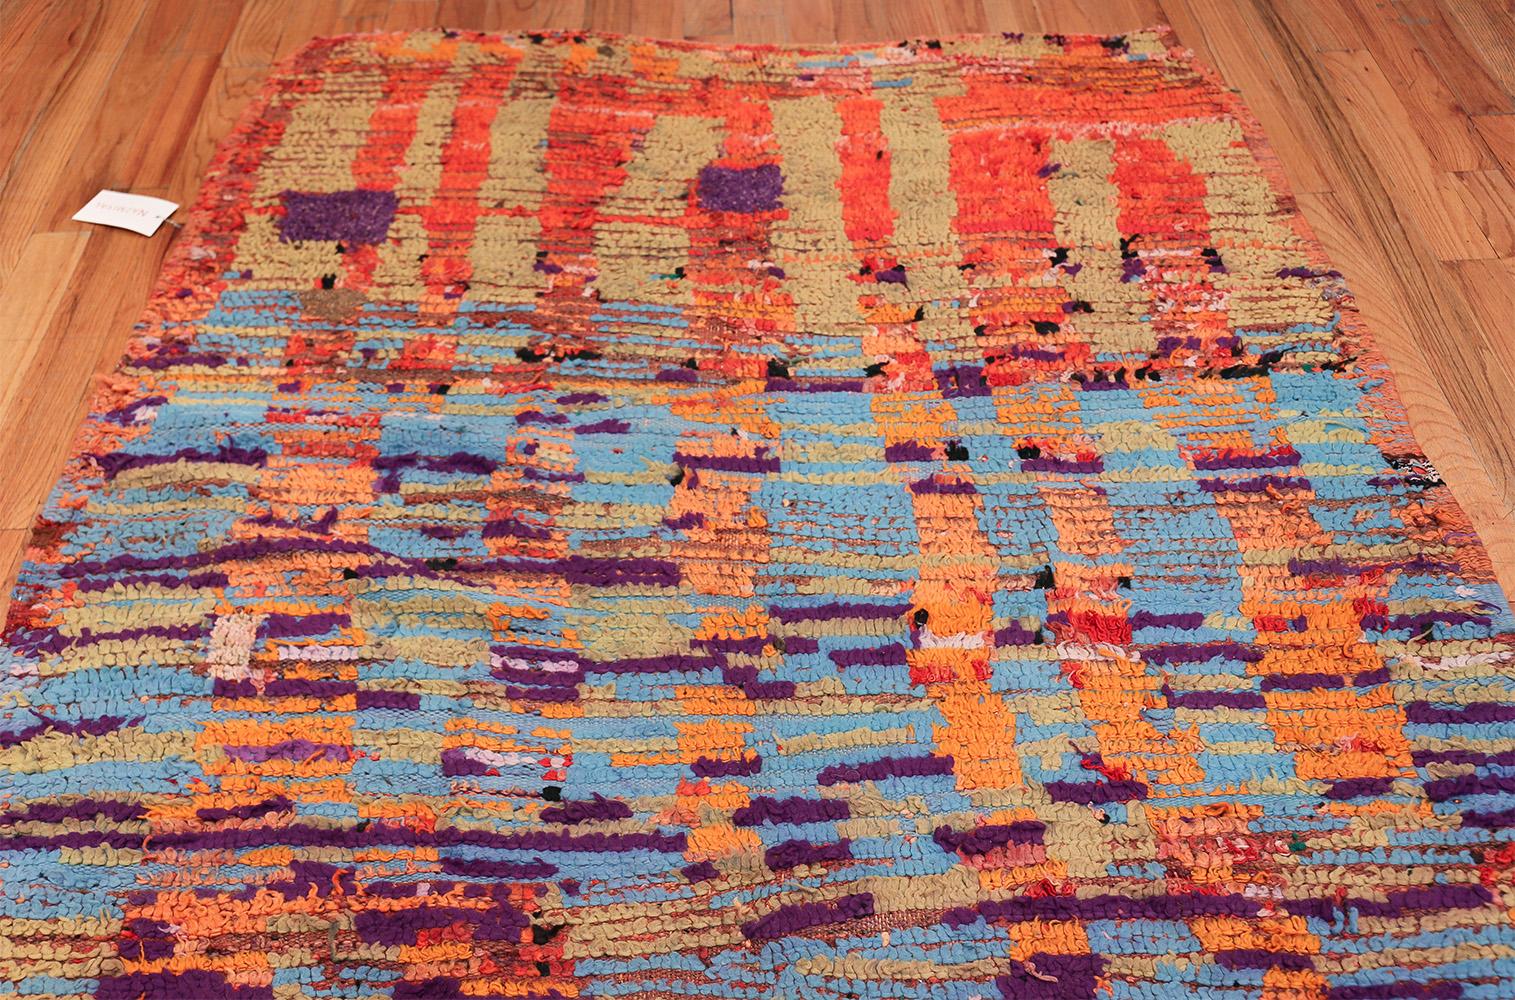 Wool Colorful Vintage Moroccan Rug. Size: 5 ft 2 in x 10 ft (1.57 m x 3.05 m)